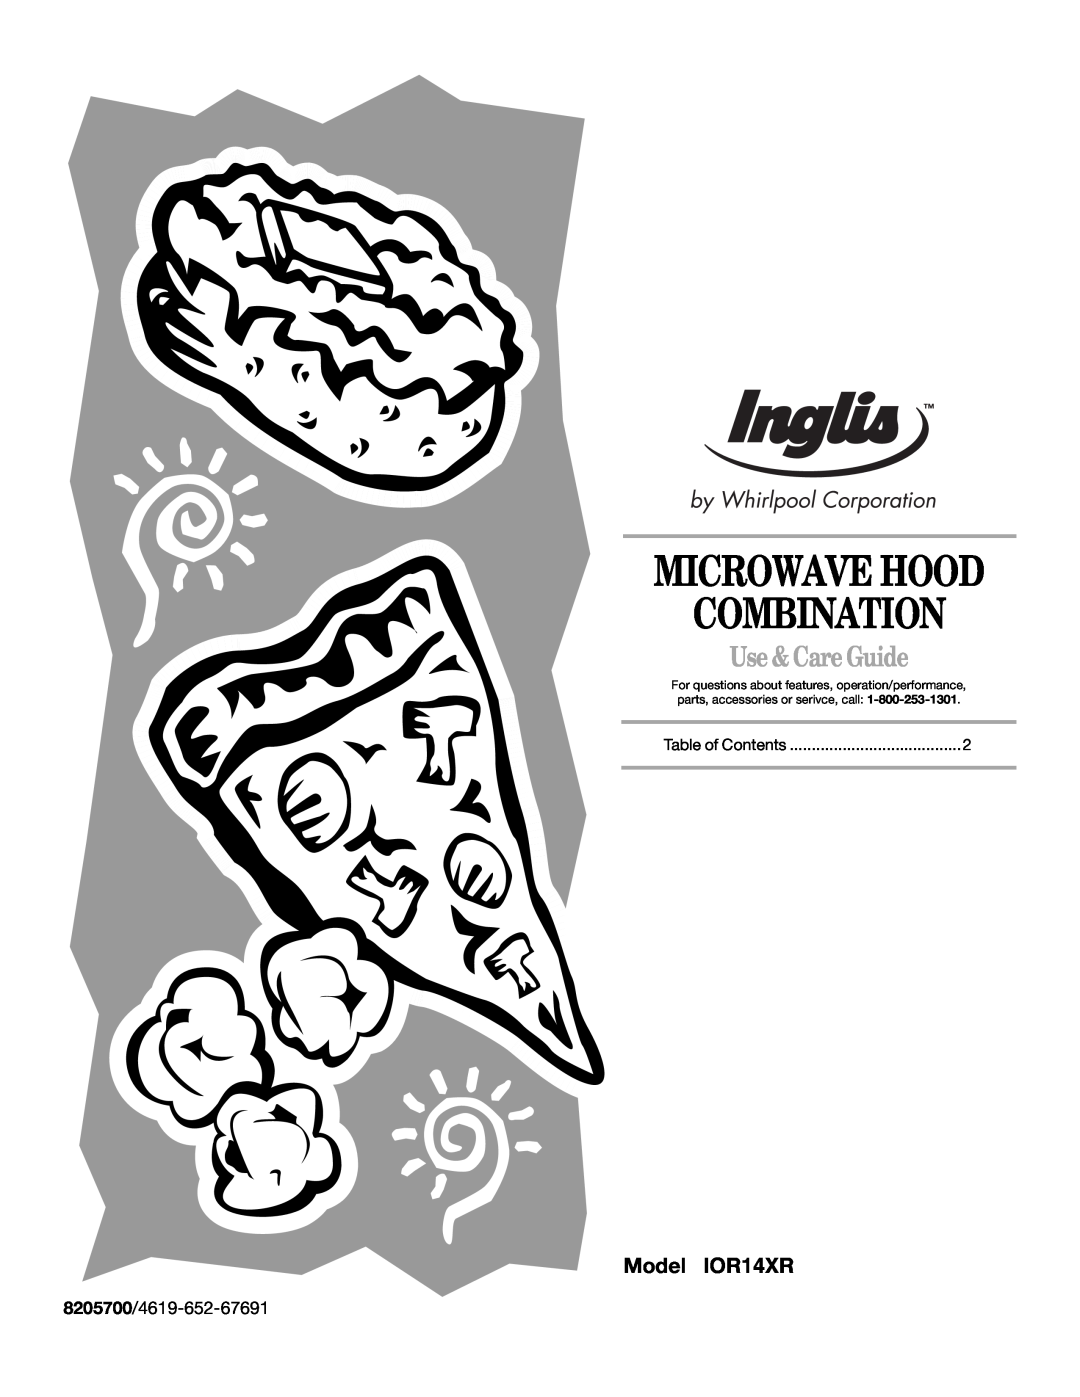 Inglis Home Appliances manual Model IOR14XR, 8205700/4619-652-67691, Microwave Hood Combination, Use & Care Guide 